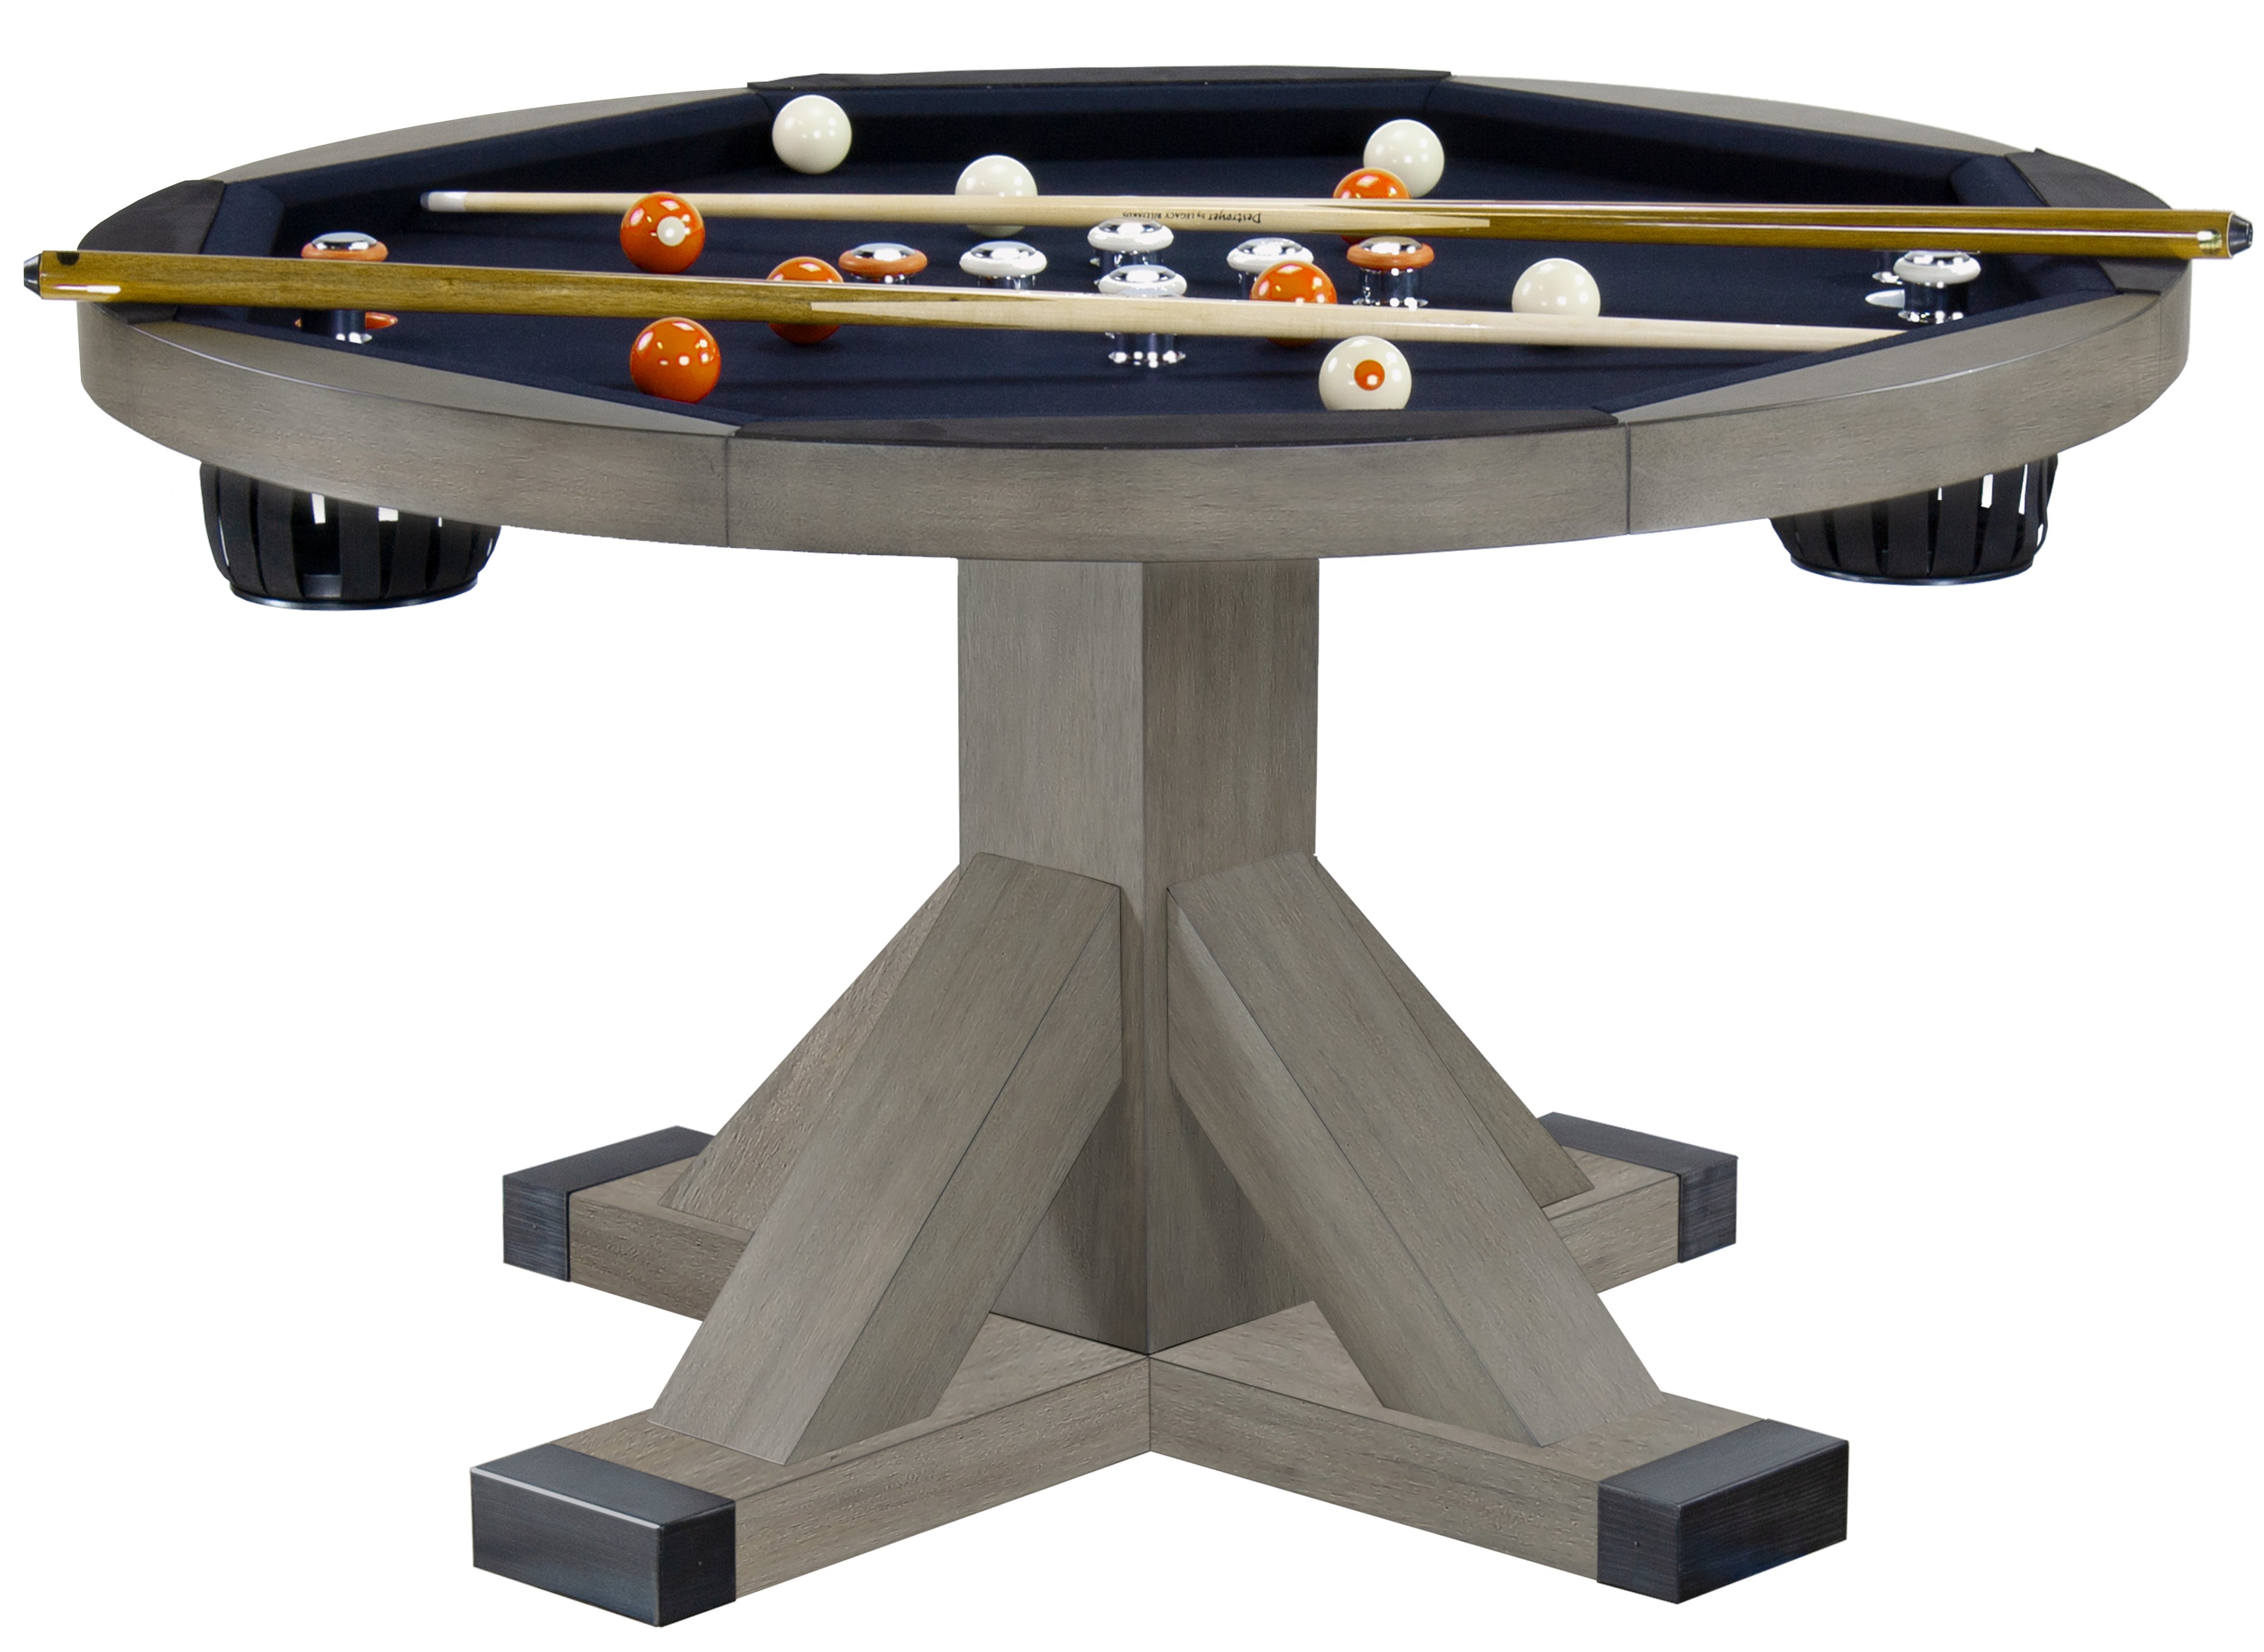 Legacy Billiards Sterling 3 in 1 Game Table with Poker, Dining and Bumper Pool in Overcast Finish